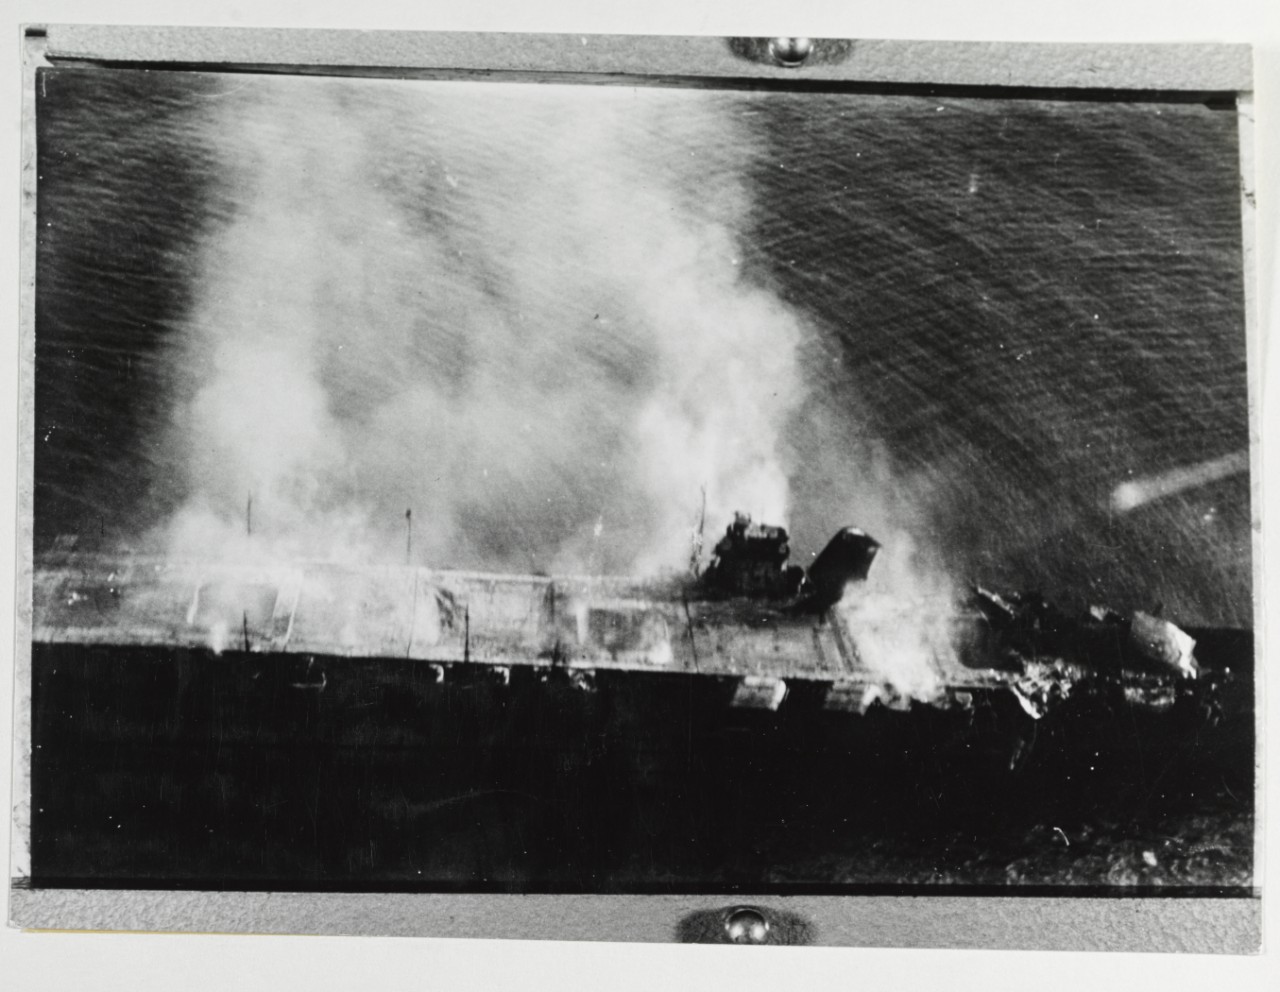 Photo #: NH 73064  Battle of Midway, June 1942